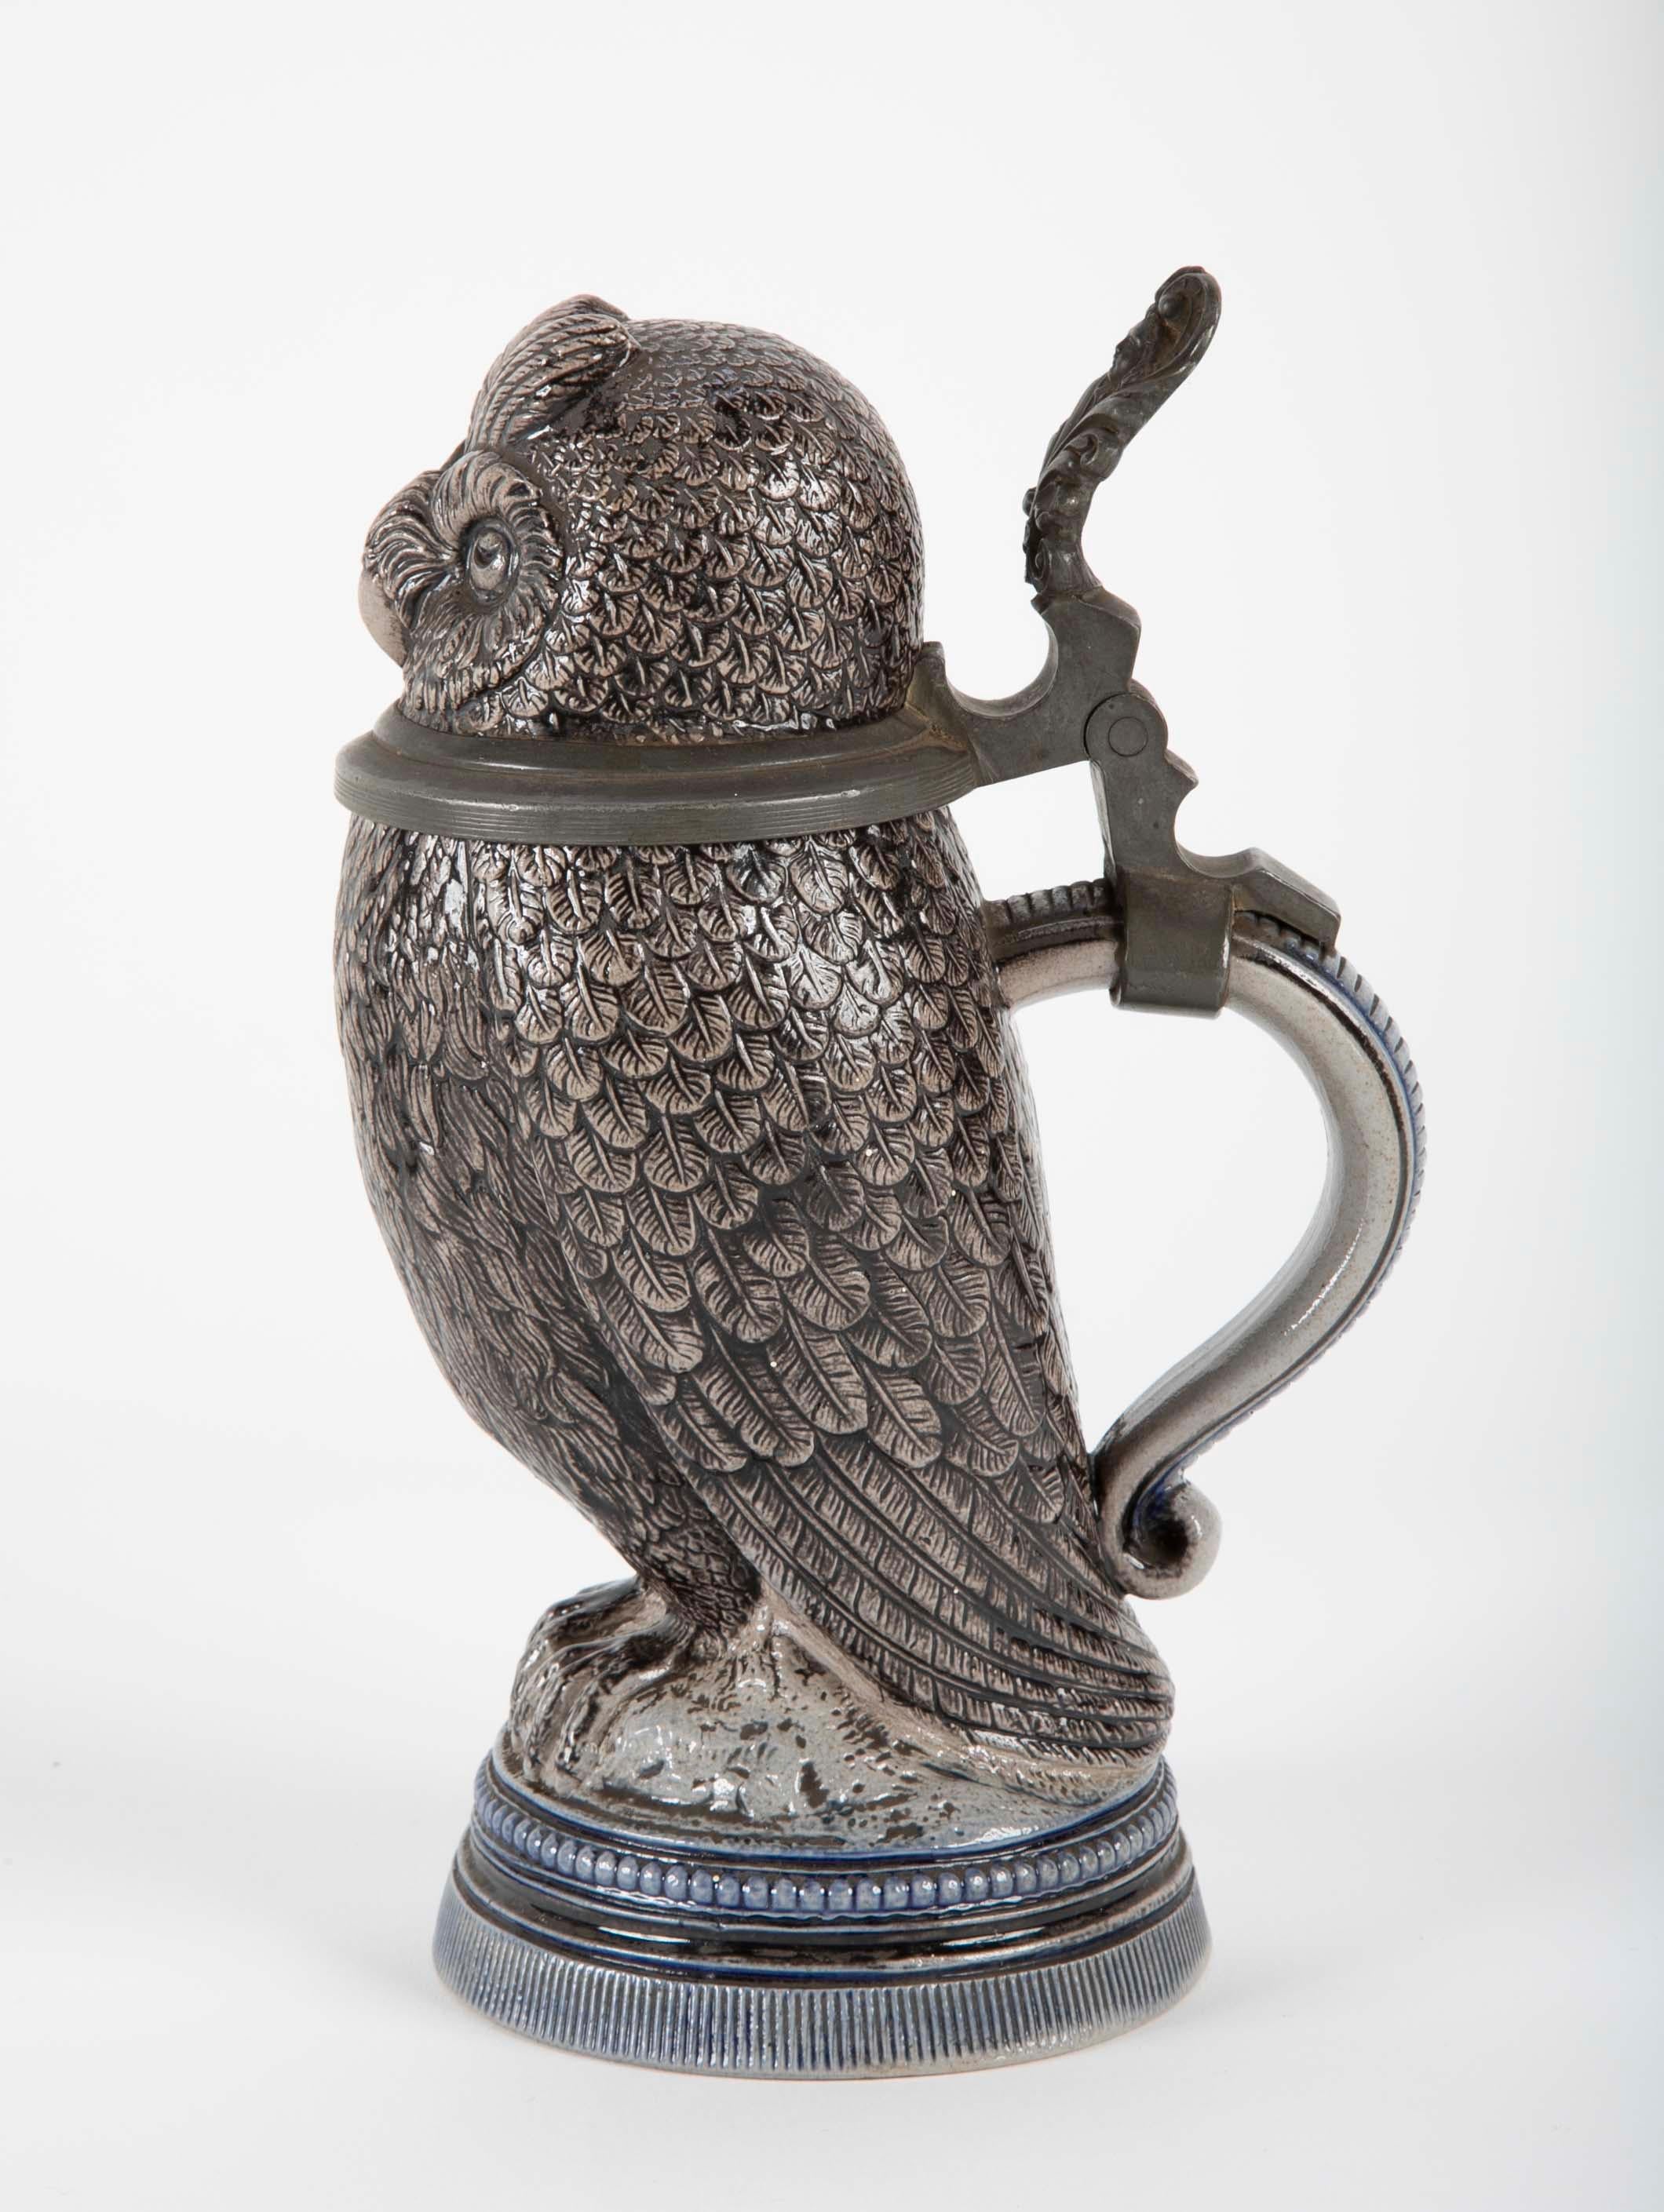 Glazed Ceramic Owl Form Tankard with Pewter Mounts In Good Condition For Sale In Stamford, CT